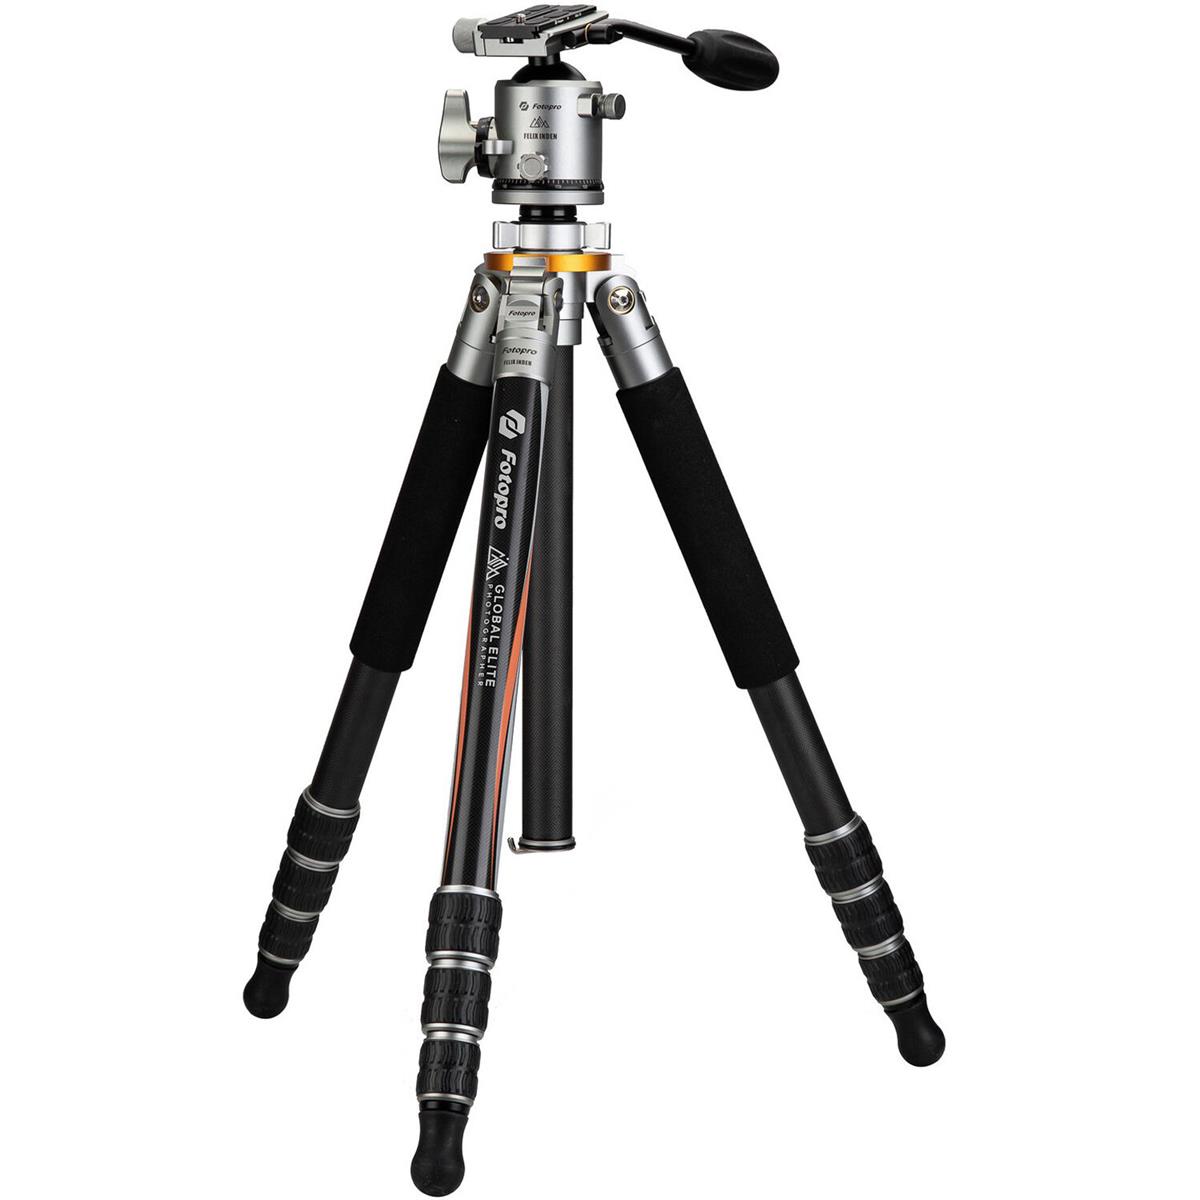 

FotoPro TL-74C GEP 4-Section Carbon Fiber Tripod with LG-9R Ball Head